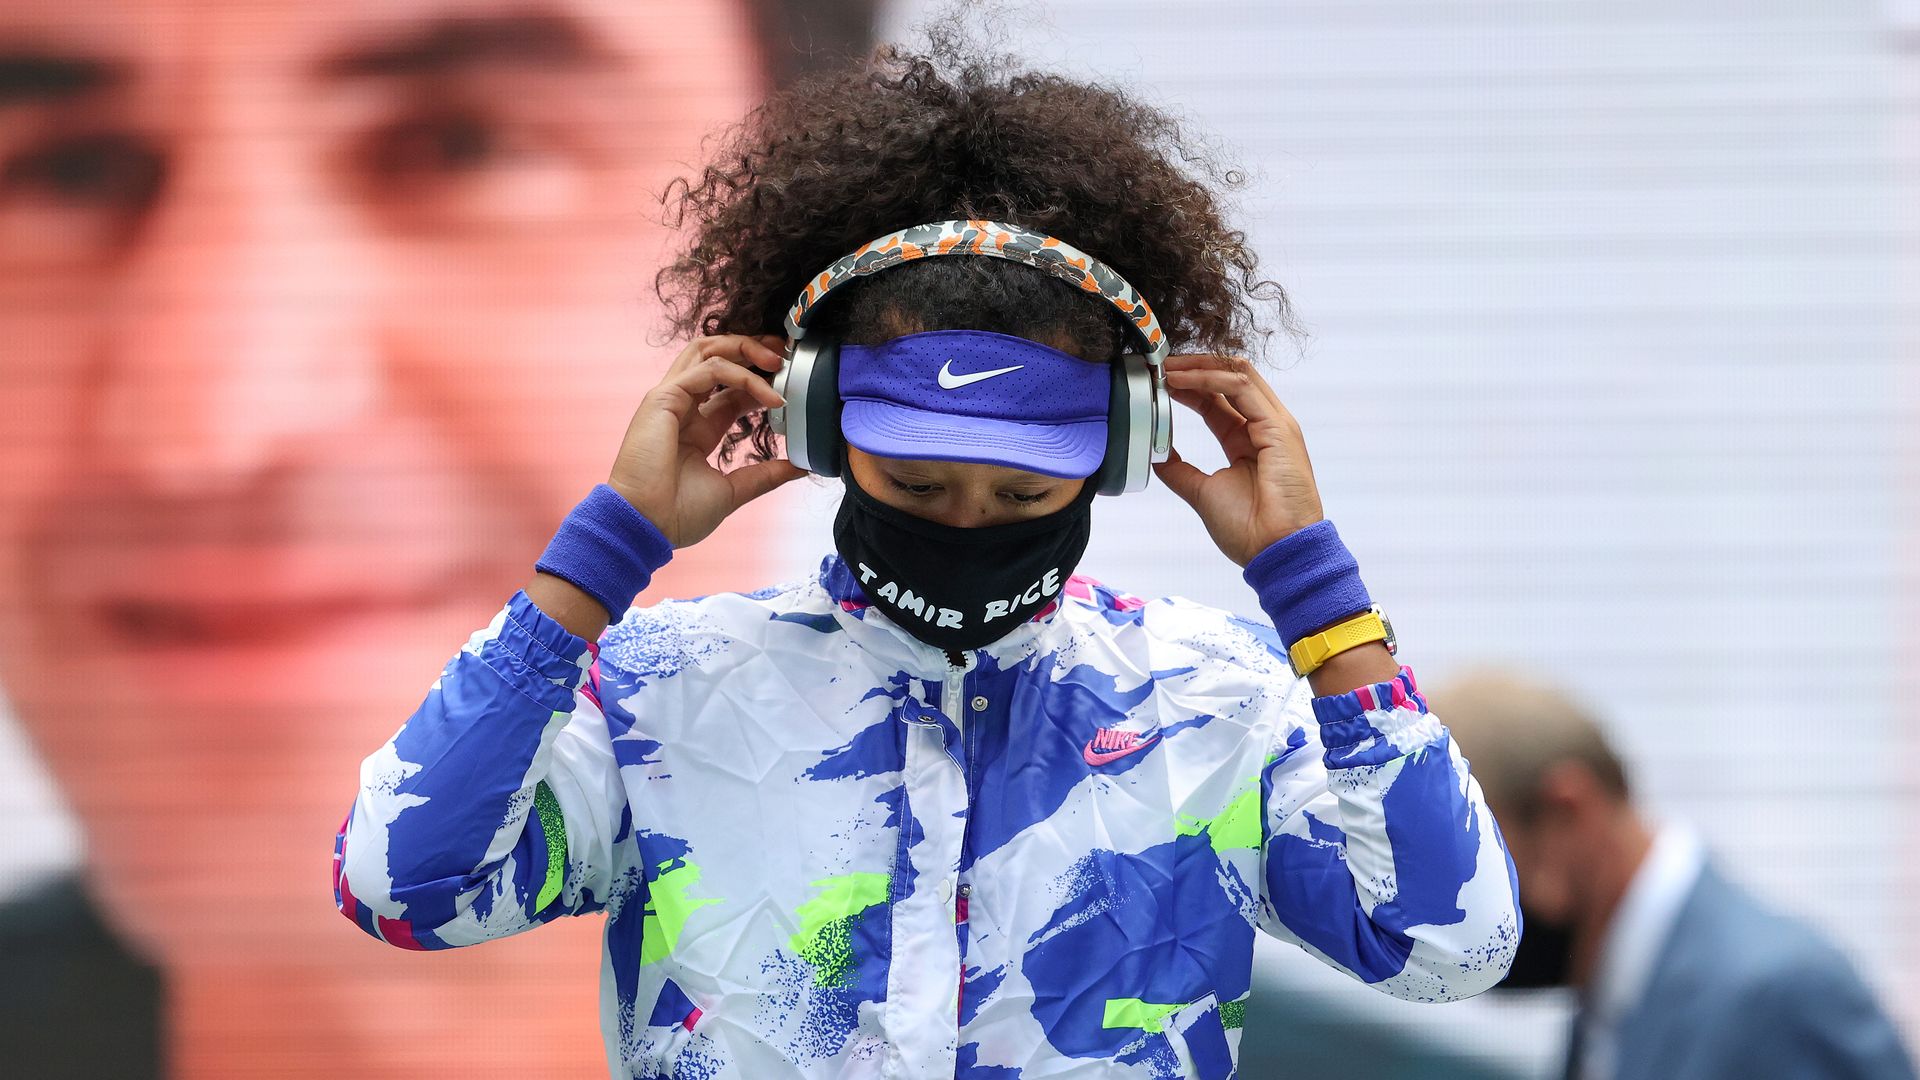  Naomi Osaka of Japan walks on court before her Women's Singles final match against Victoria Azarenka of Belarus in the US Open at the USTA Billie Jean King National Tennis Center in  New York City.